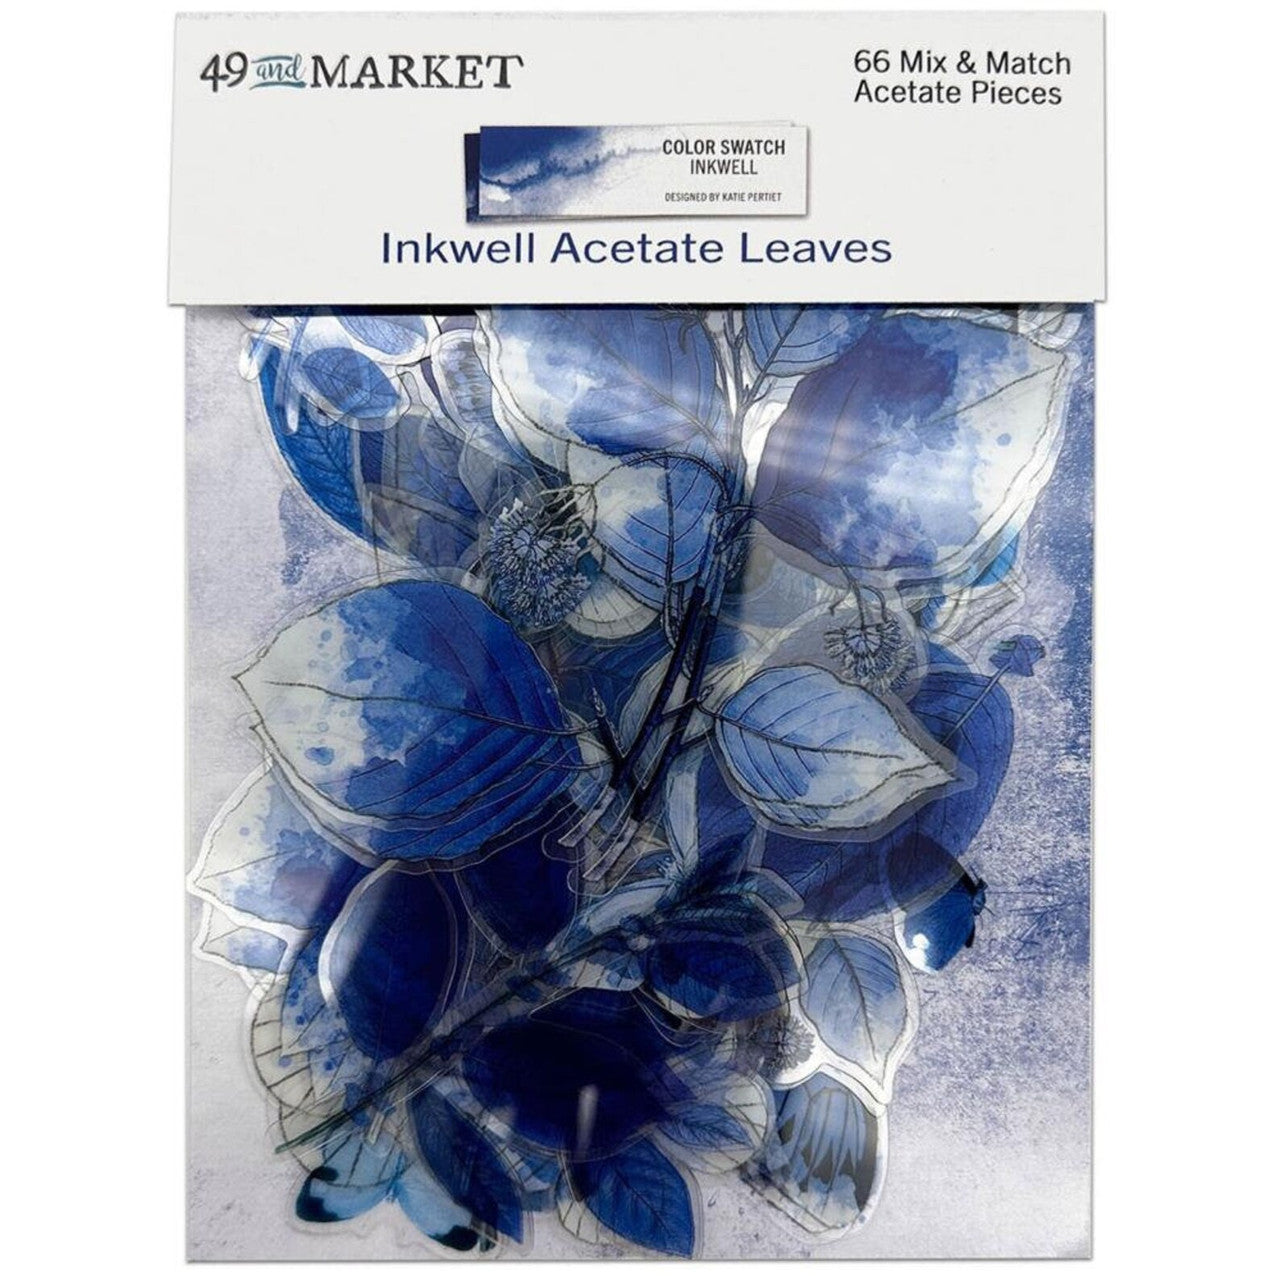 49 and Market Color Swatch Inkwell Acetate Leaves